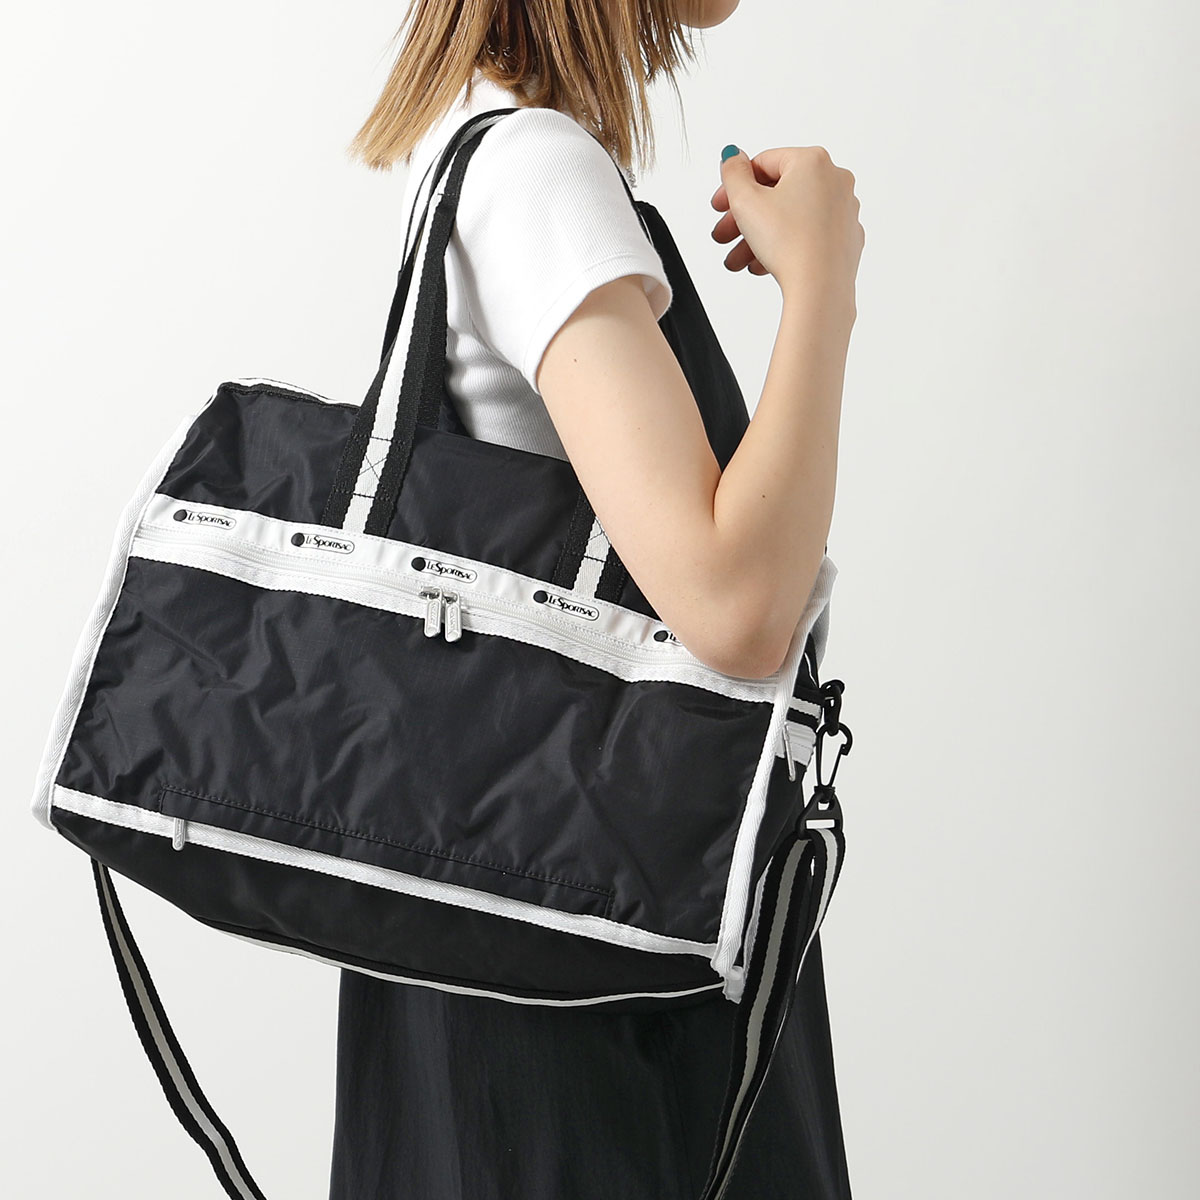 LeSportsac ボストンバッグ DELUXE MED WEEKENDER CLASSIC SP...